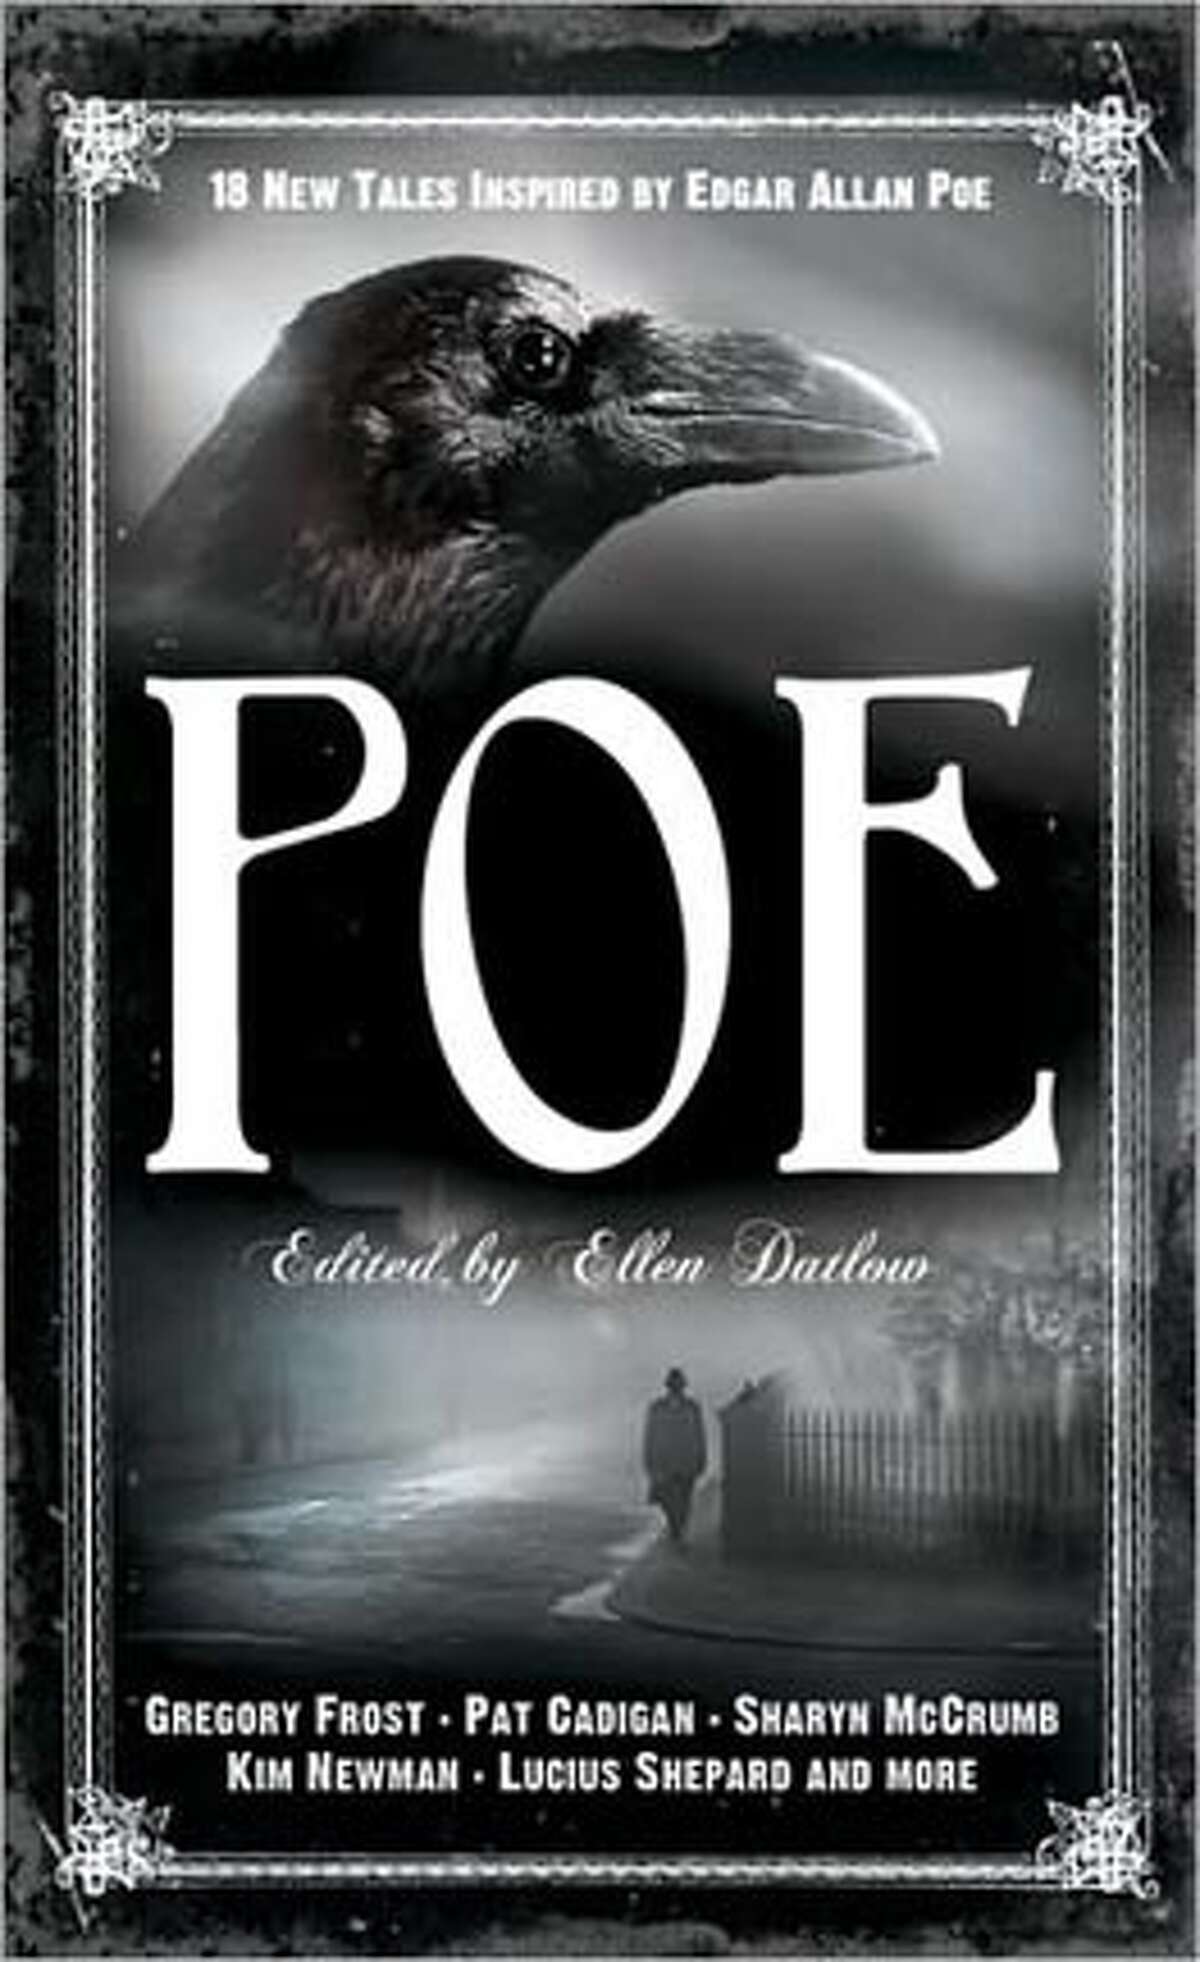 'Poe' by various writers